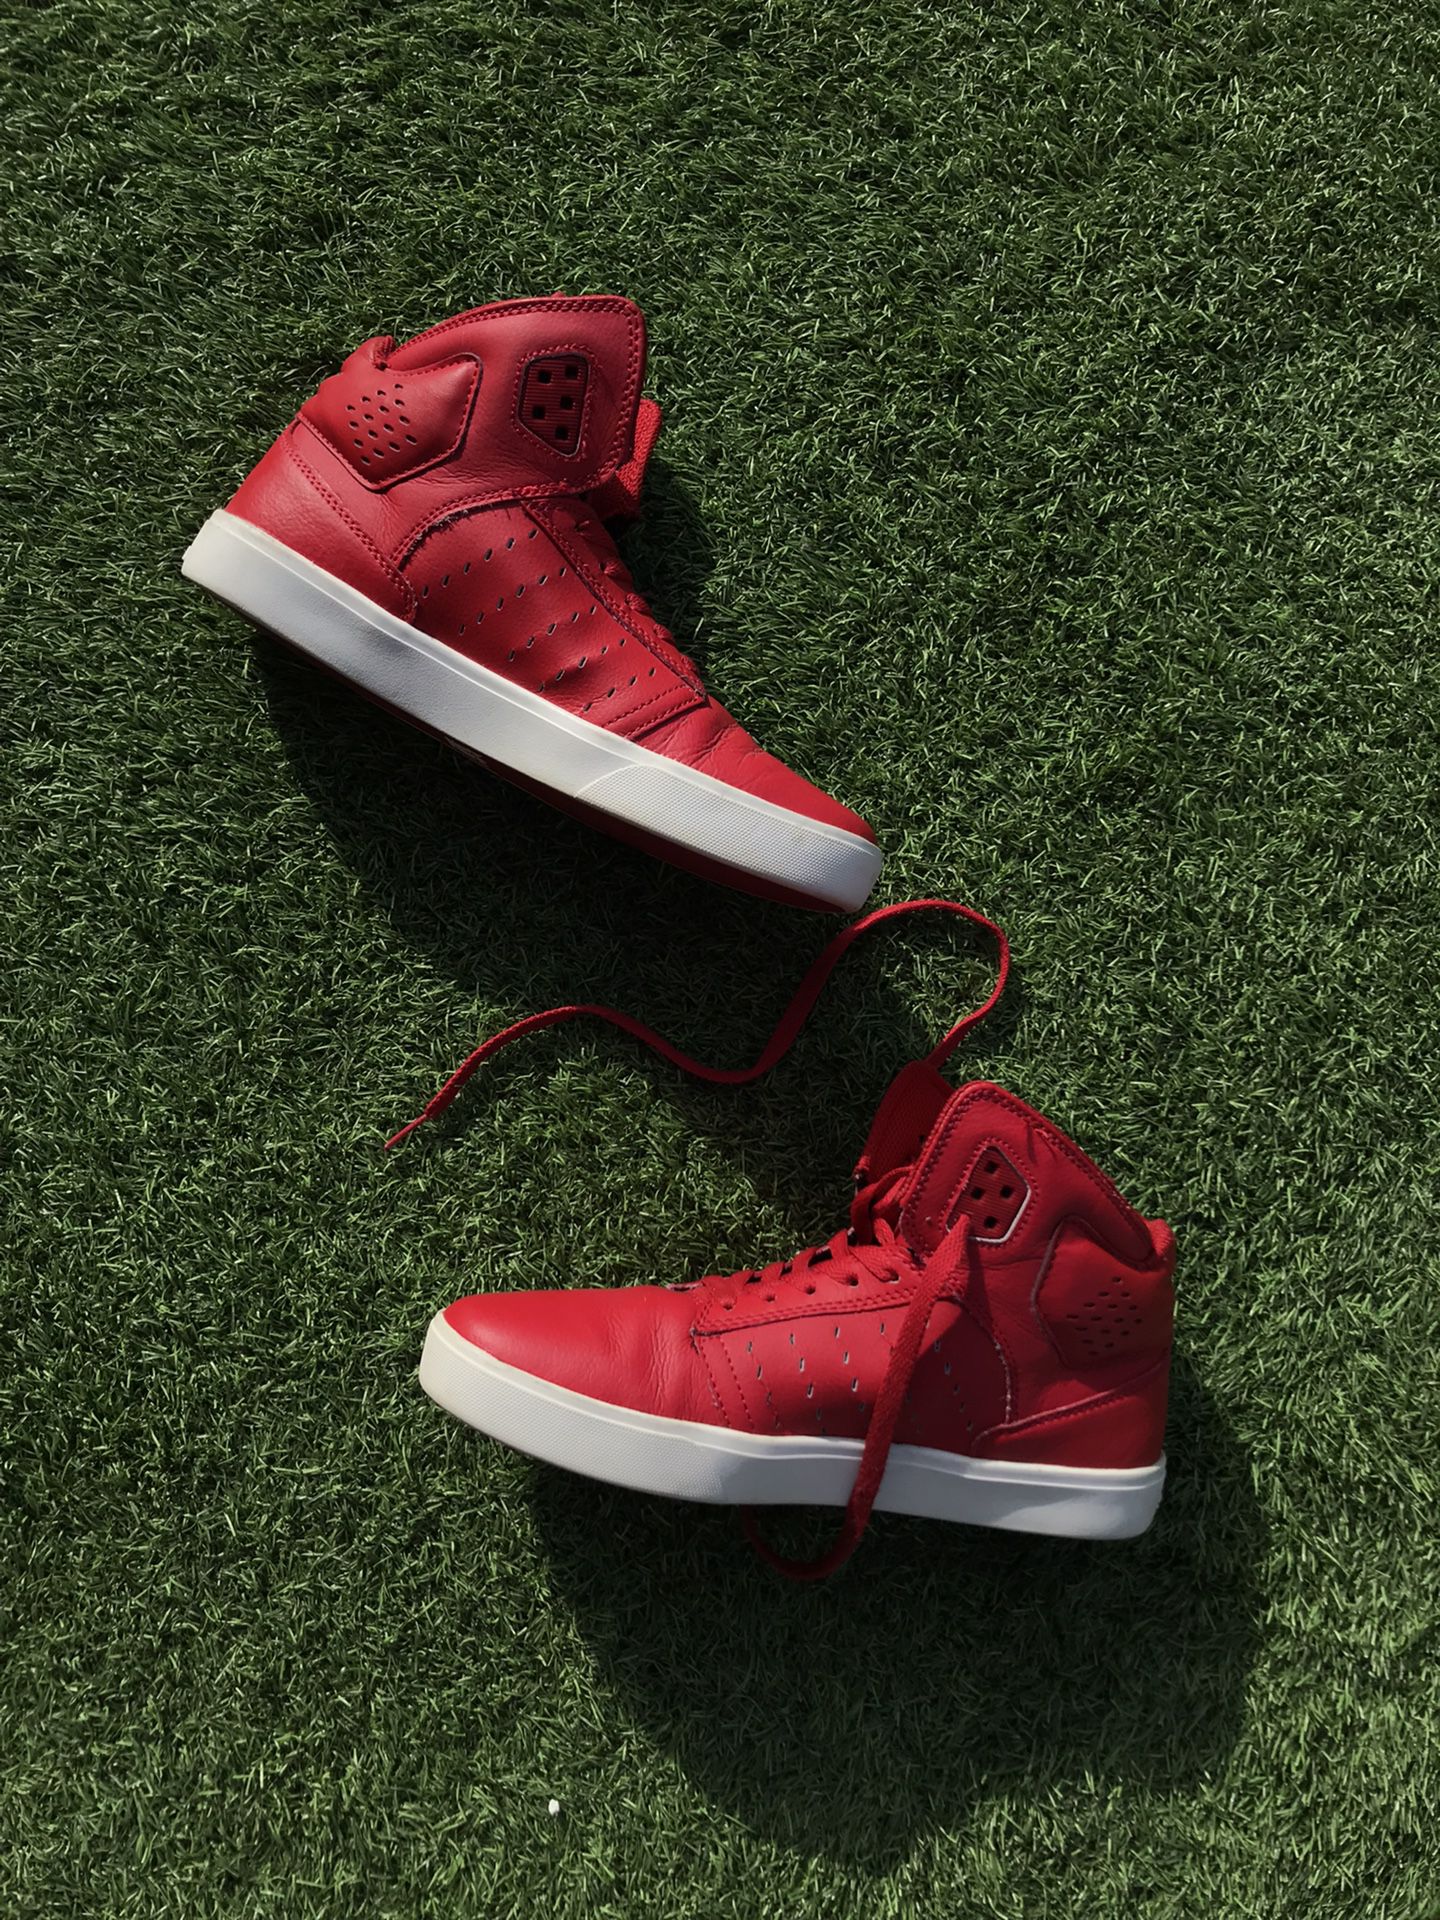 Supra Shoes Sneaker High Cut No Box Logo-Tongue/Heel Leather Red 22M 9 US for Sale in Santa Ana, CA OfferUp